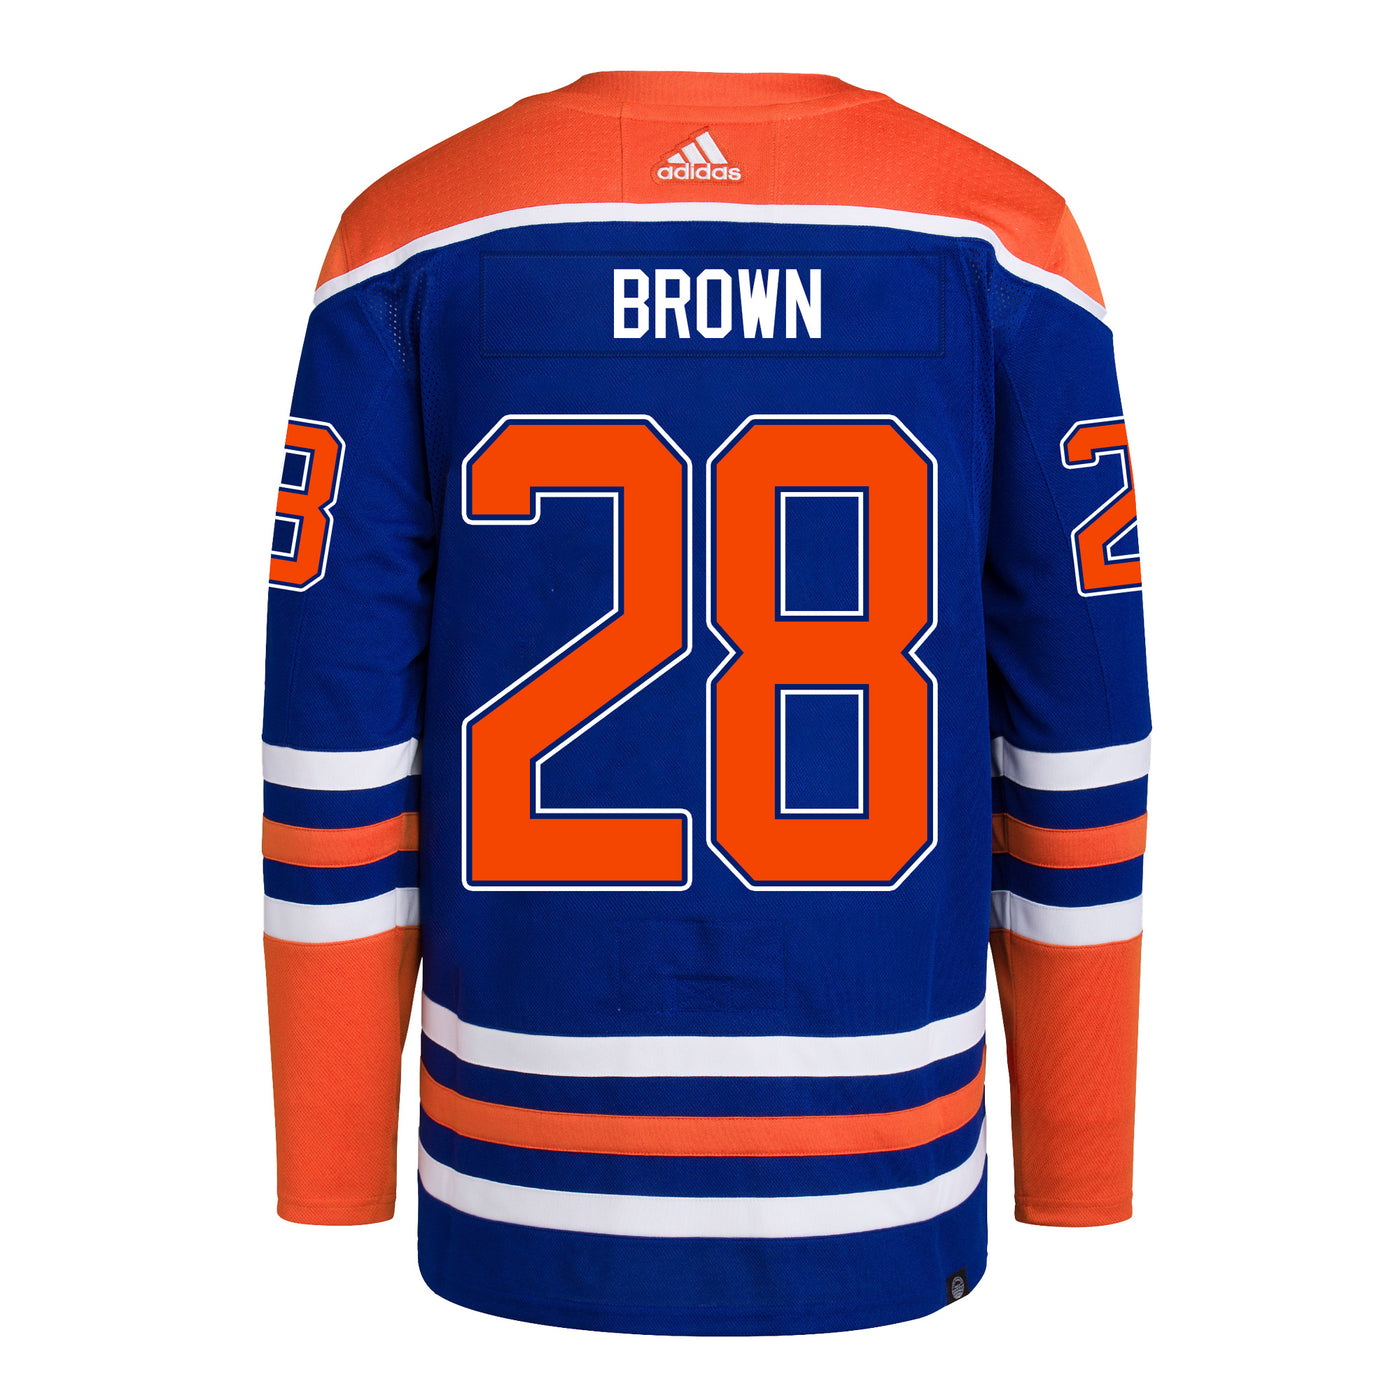 Connor Brown Edmonton Oilers adidas Primegreen Authentic Royal Blue Home Jersey